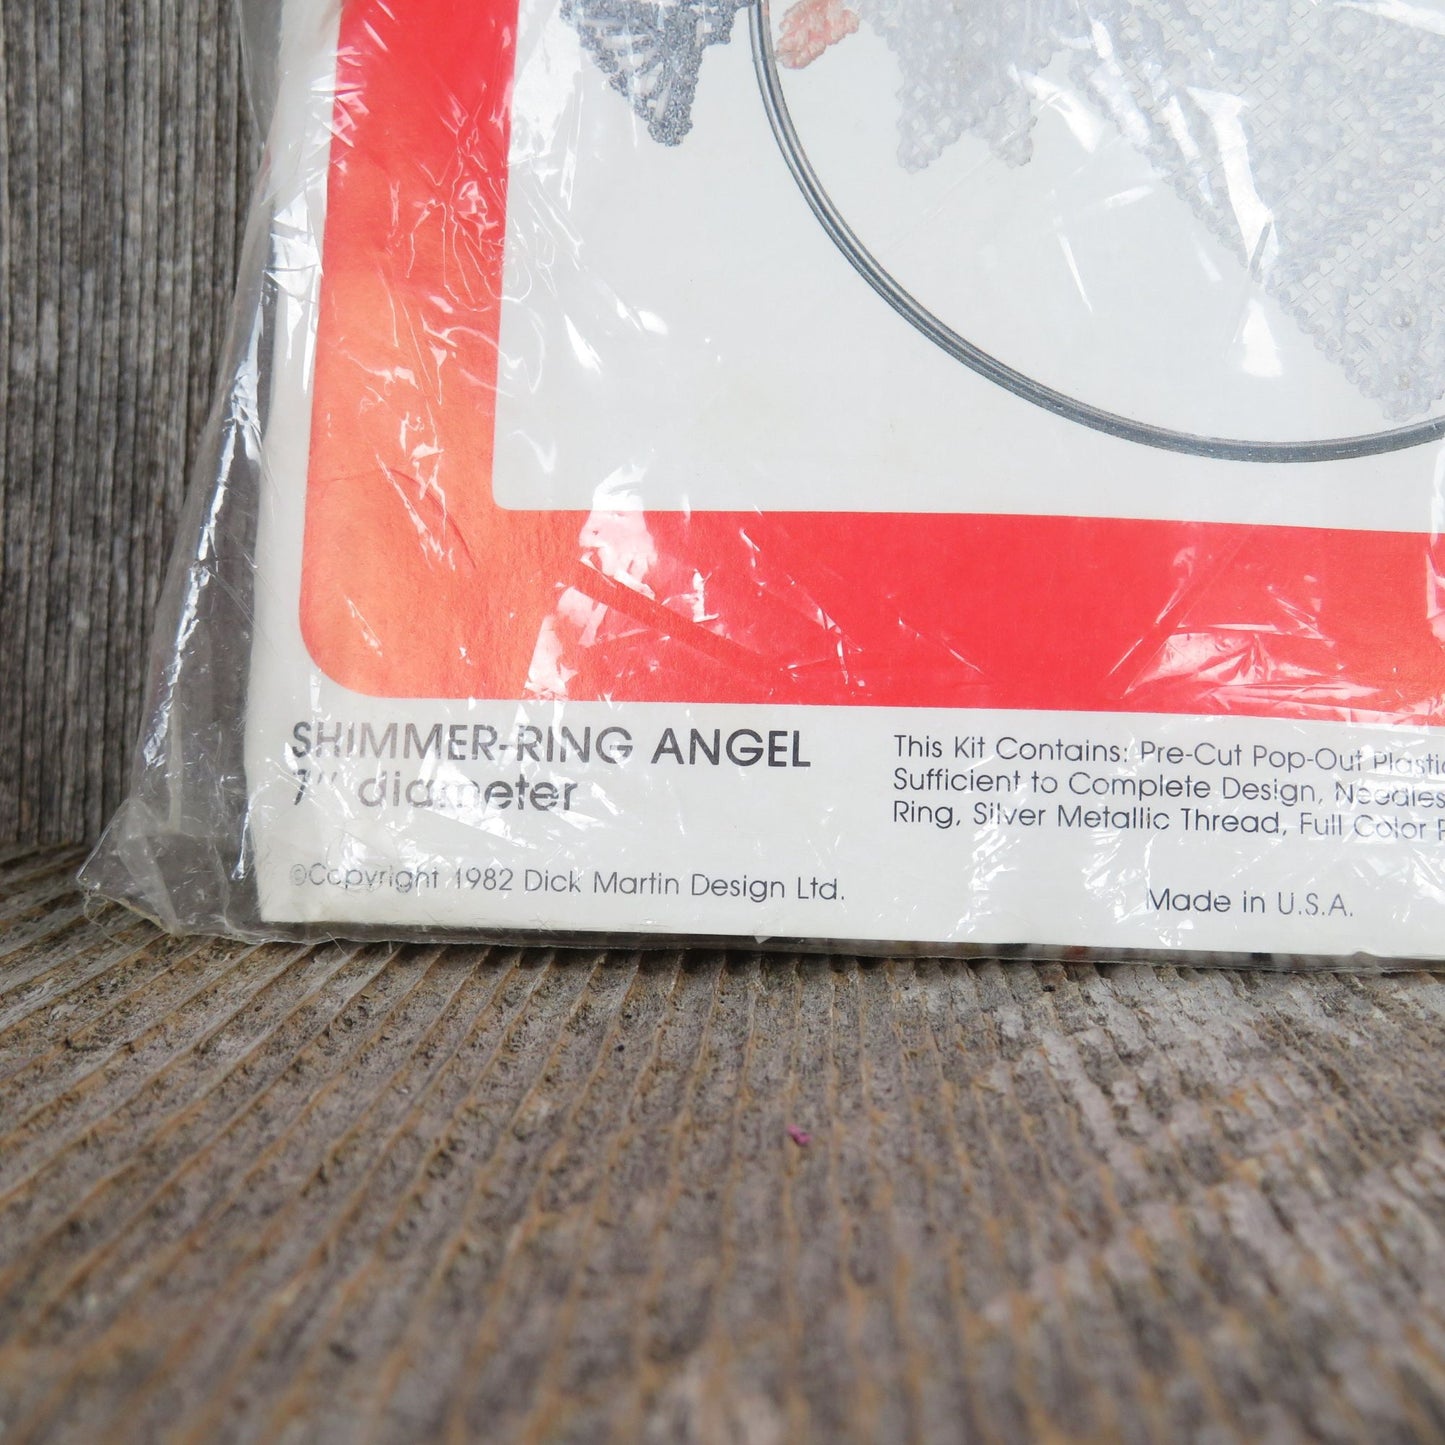 Plastic Canvas Angel Ornament Kit Leisure Arts Canvas Capers Shimmer ring Angel Christmas